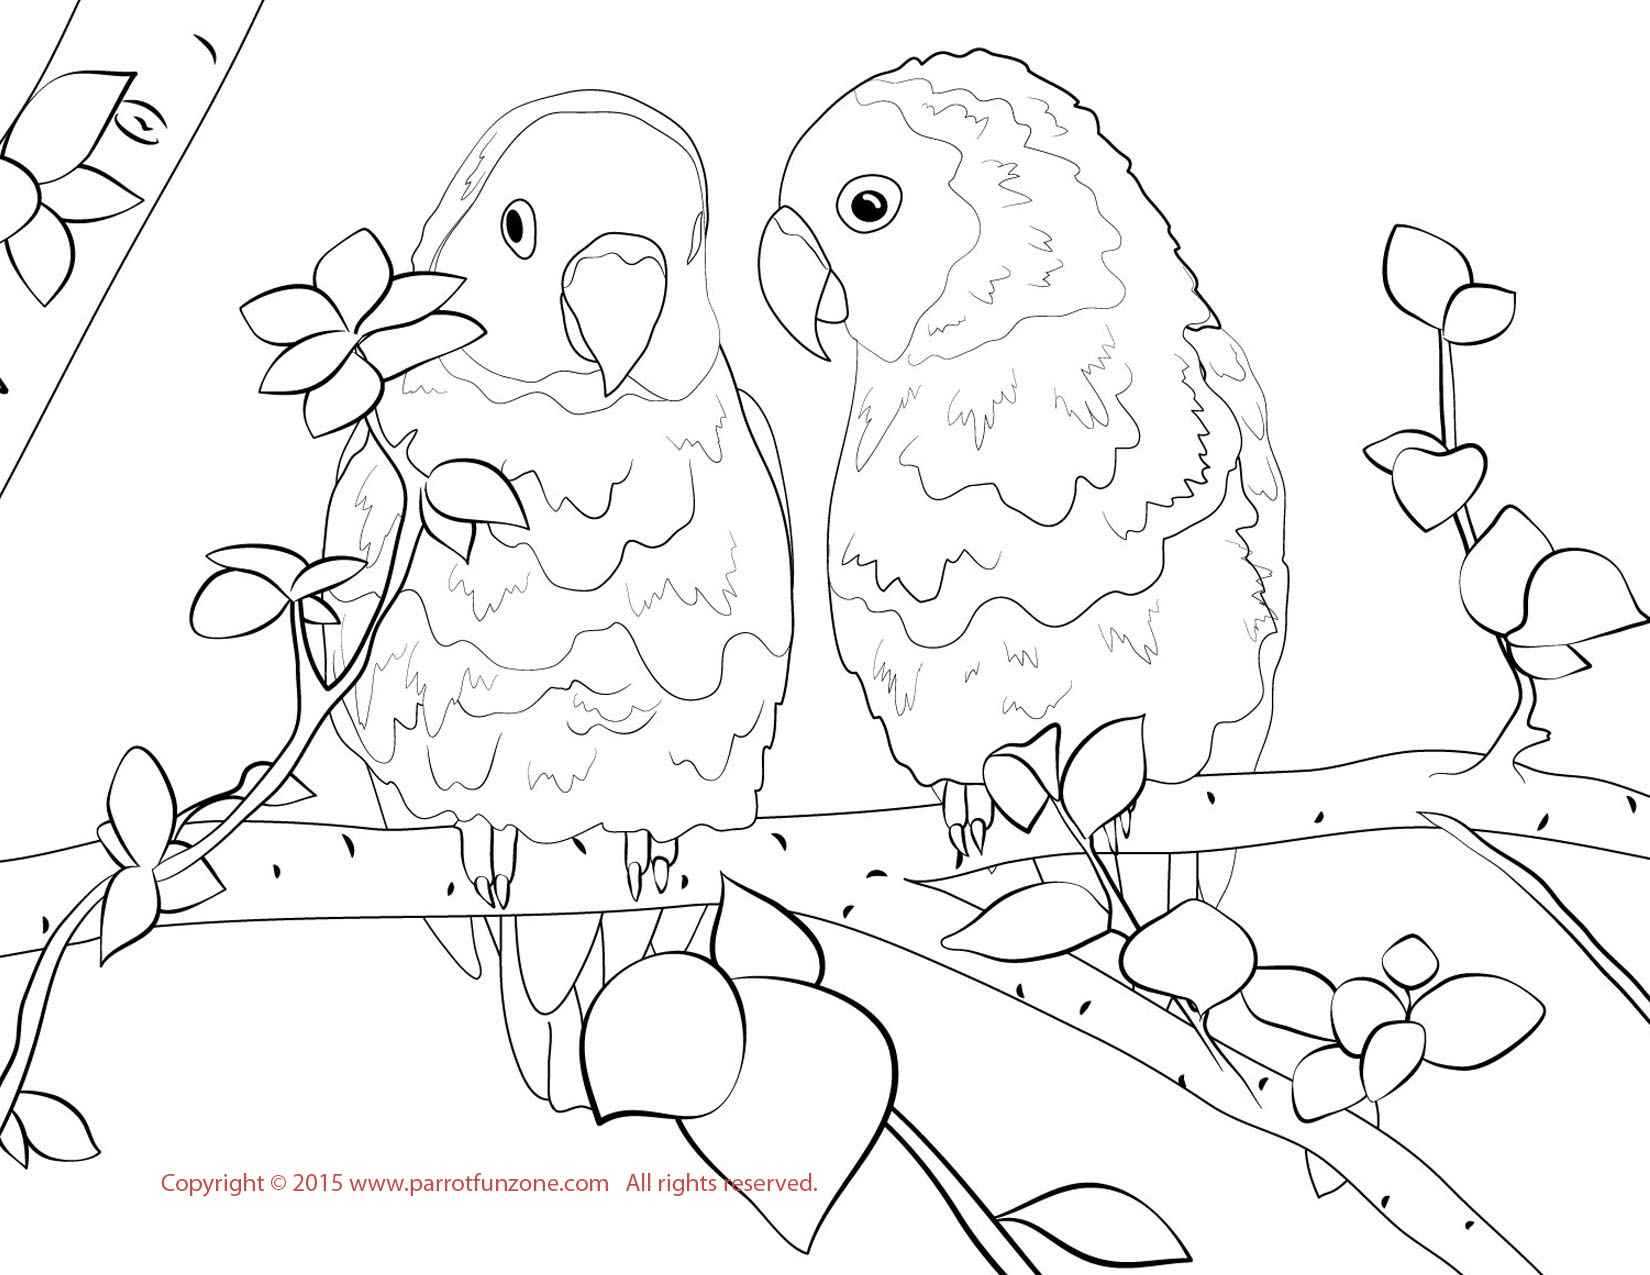 lovebirds coloring page